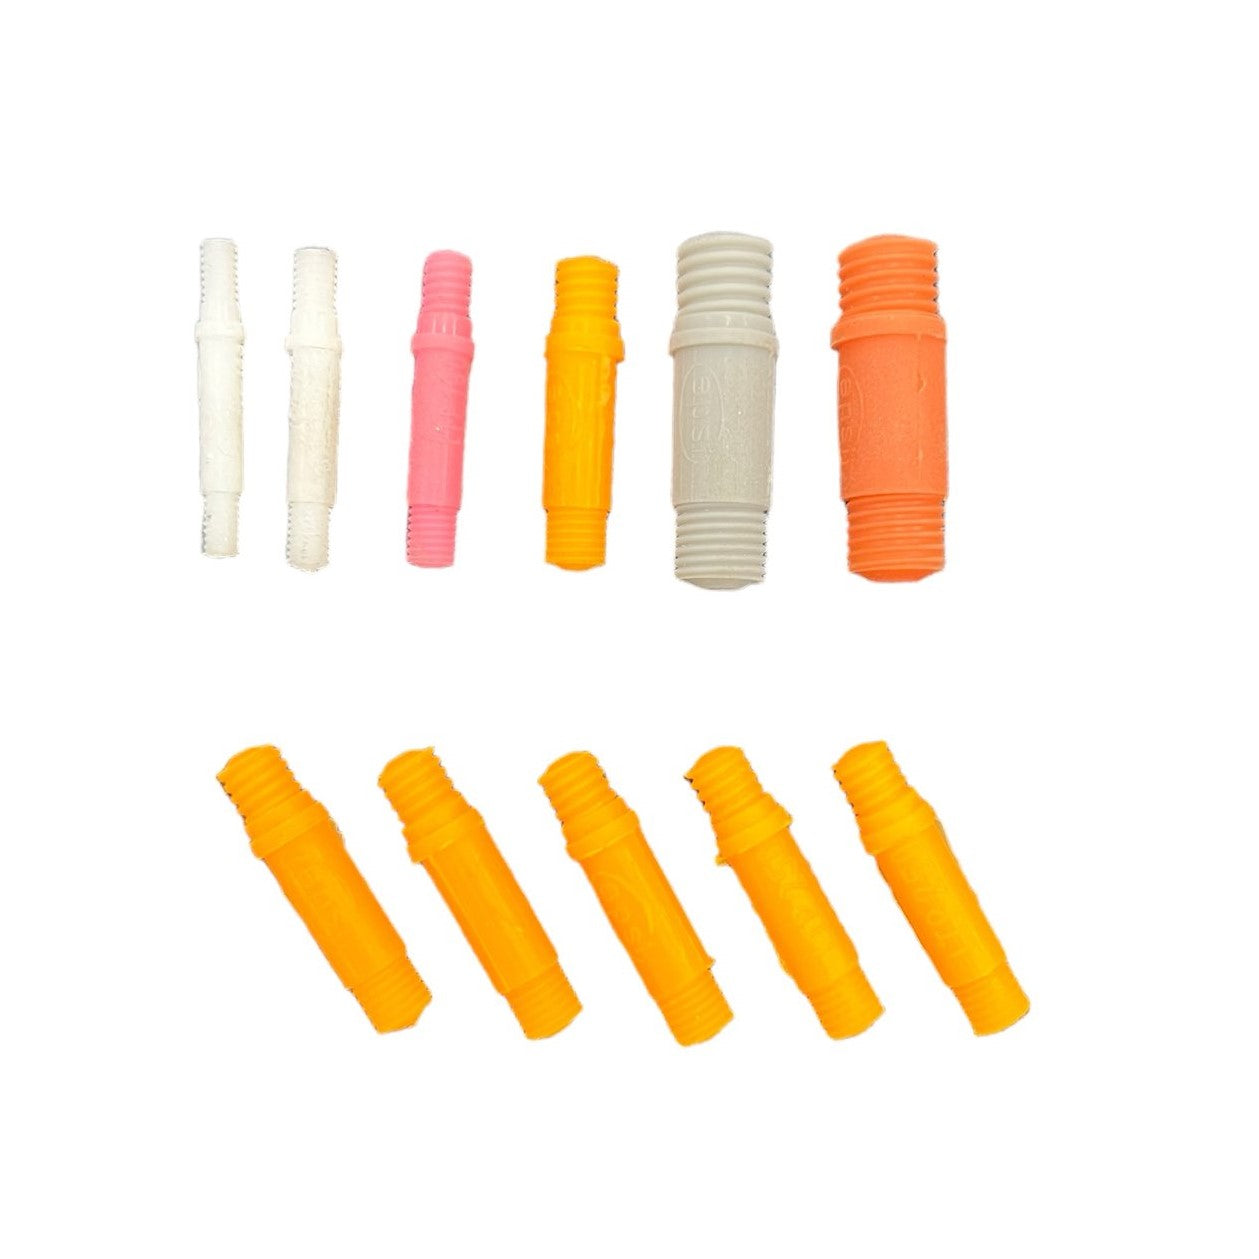 Dual-sided Silicone Threaded Plugs #1/4-20 Coarse / #1/4-28 Fine (50 Count)